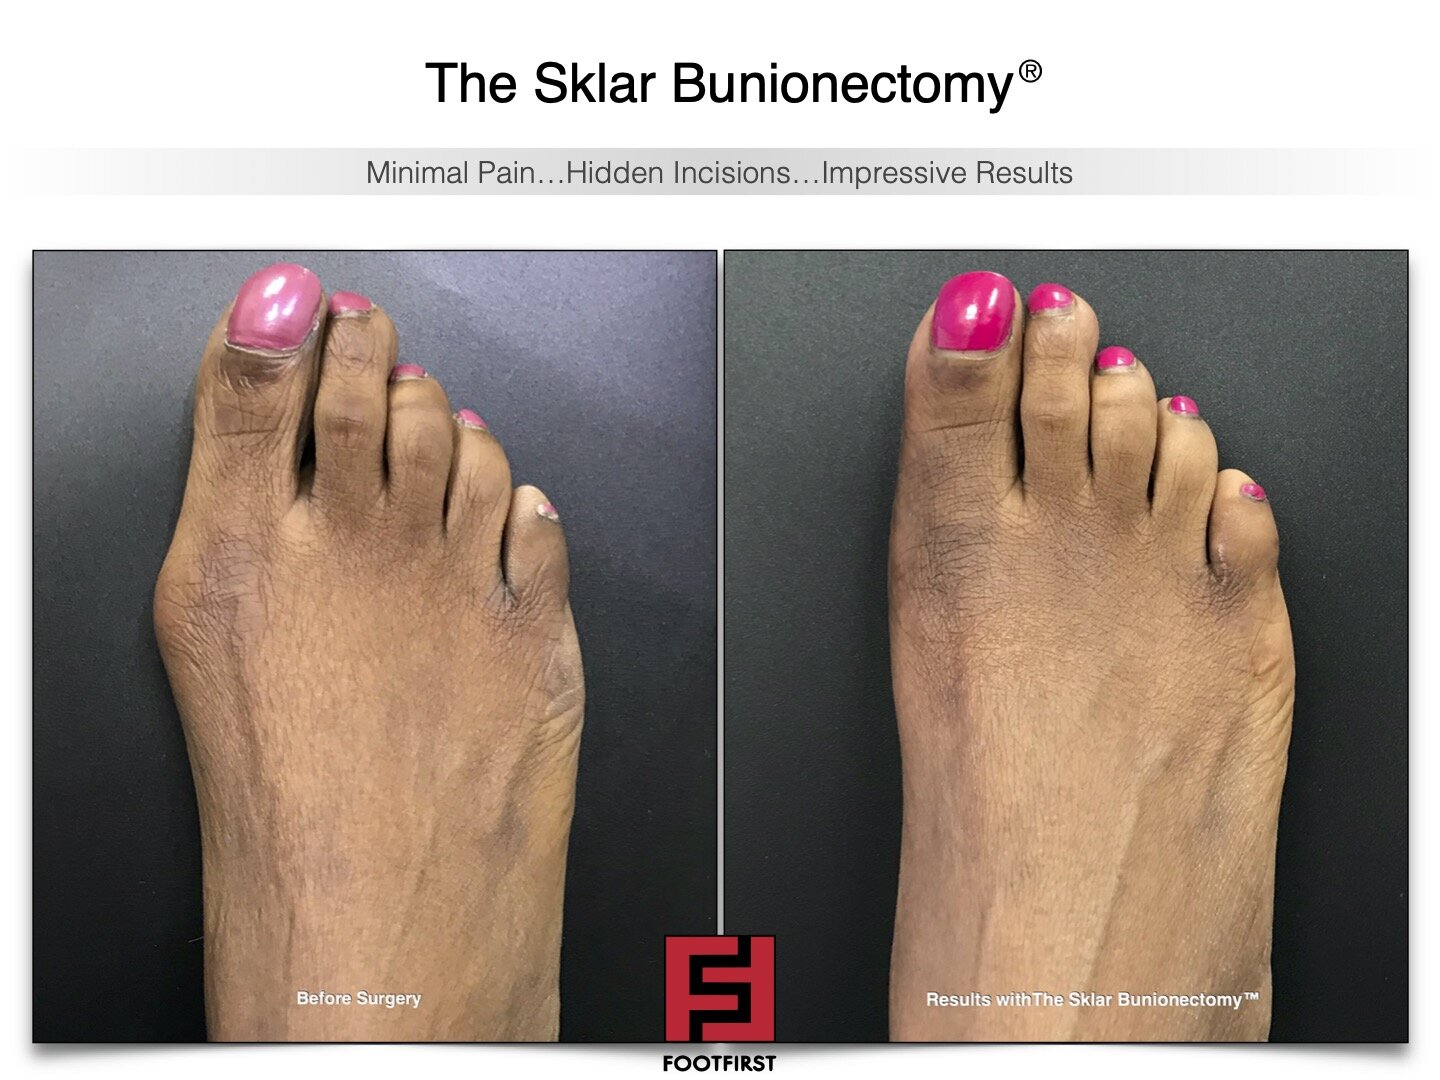 www.footfirst.com | Cosmetic Bunion and Toe Shortening Surgery COPYRIGHT FOOTFIRST 142.jpg